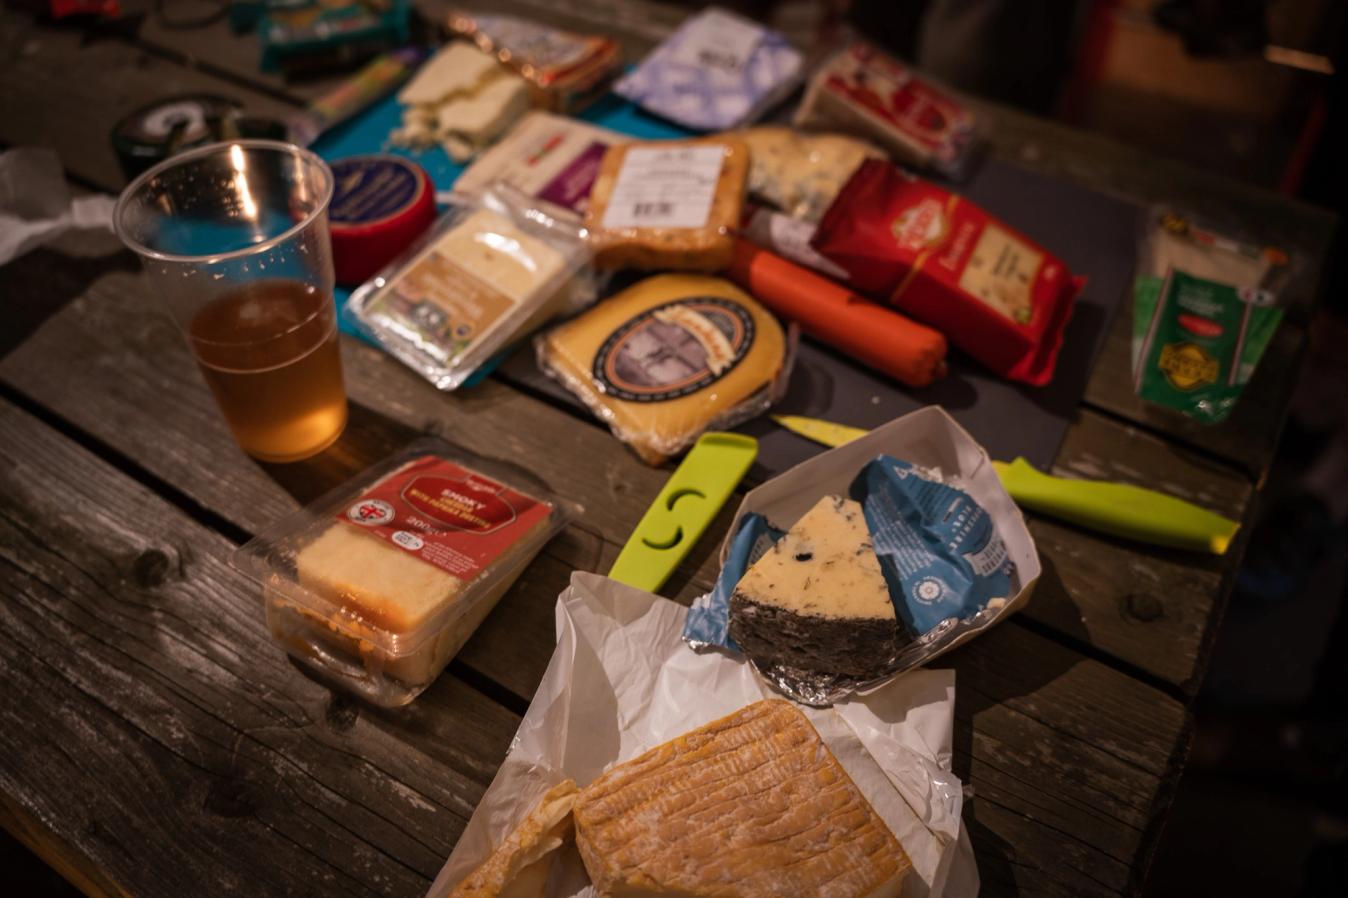 Charlie's Saturday night cheese competition: Doug's stilton clinched victory